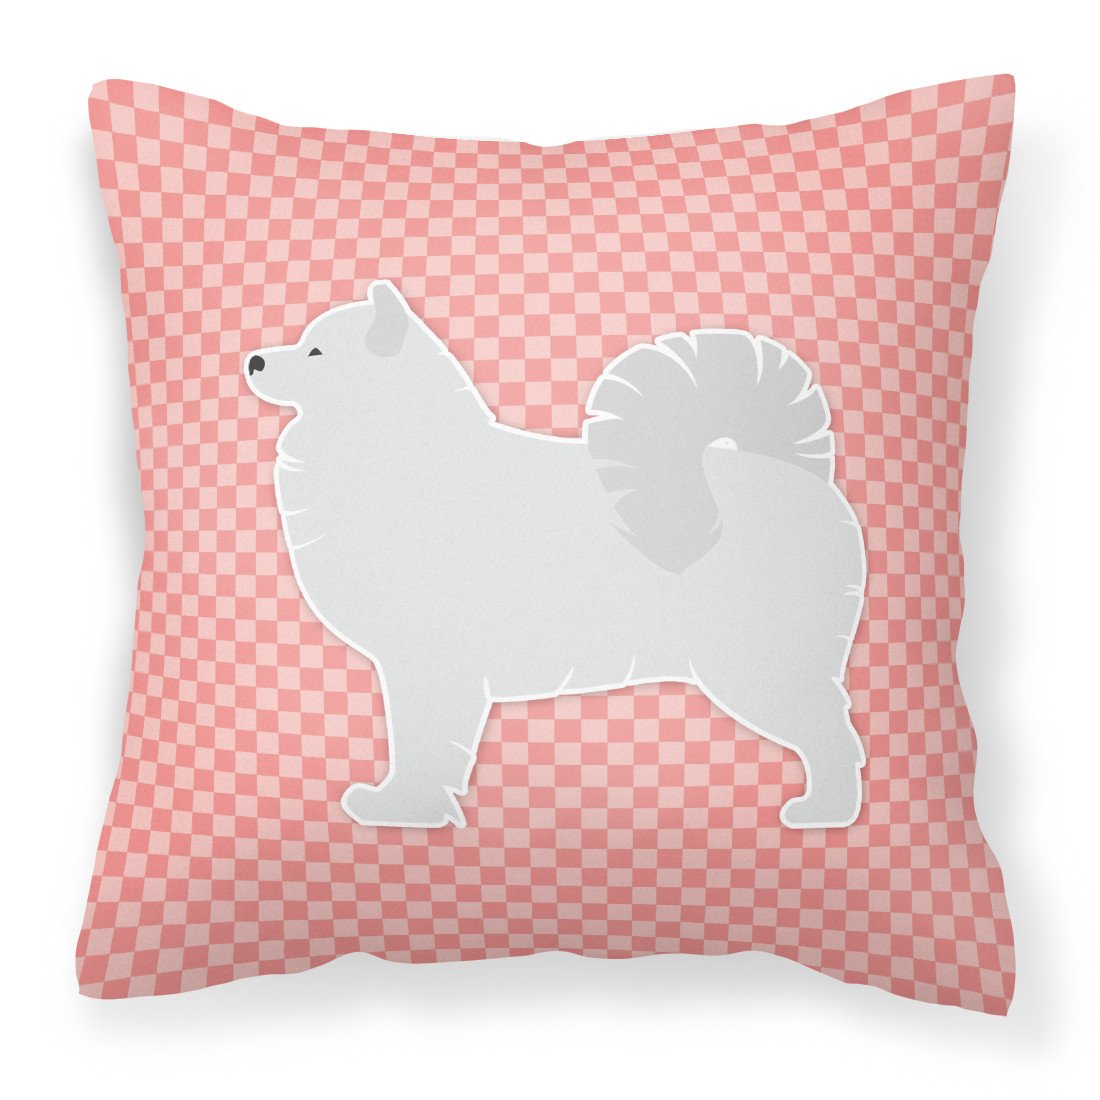 Samoyed Checkerboard Pink Fabric Decorative Pillow BB3659PW1818 by Caroline's Treasures